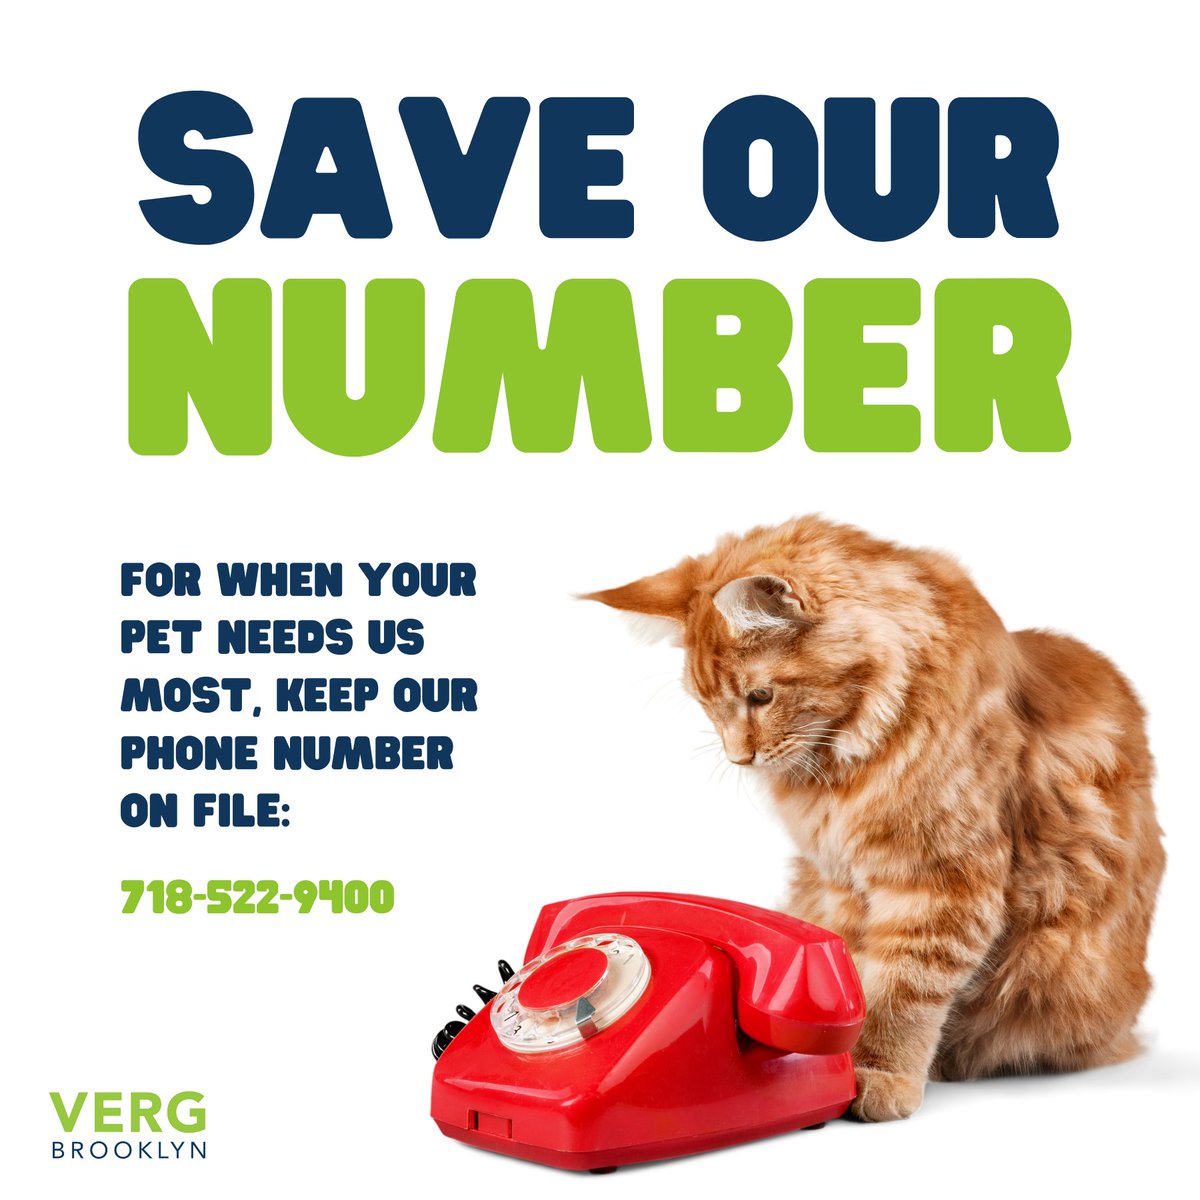 Preparedness for emergency situations isn't just for humans! Keep our number saved for your furry family members' sake. You never know when a quick call could save your pet's life. 🐾☎️ #PetSafety #EmergencyCare